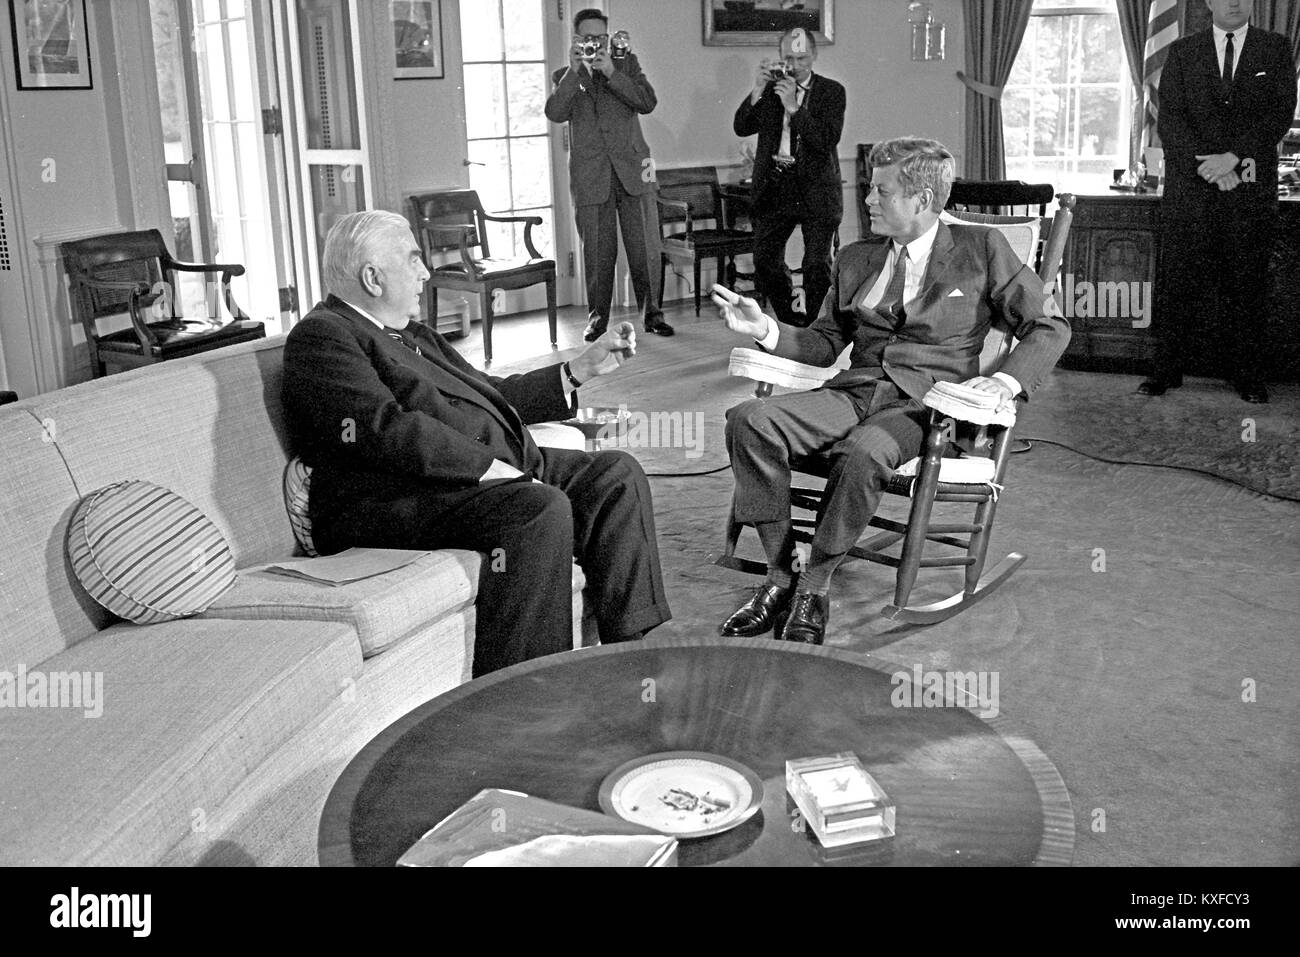 United States President John F. Kennedy (in rocking chair), right, meets with Prime Minister of Australia Robert G. Menzies, left, in the Oval Office of the White House in Washington, DC on September 25, 1962. Credit: Arnie Sachs / CNP /MediaPunch Stock Photo